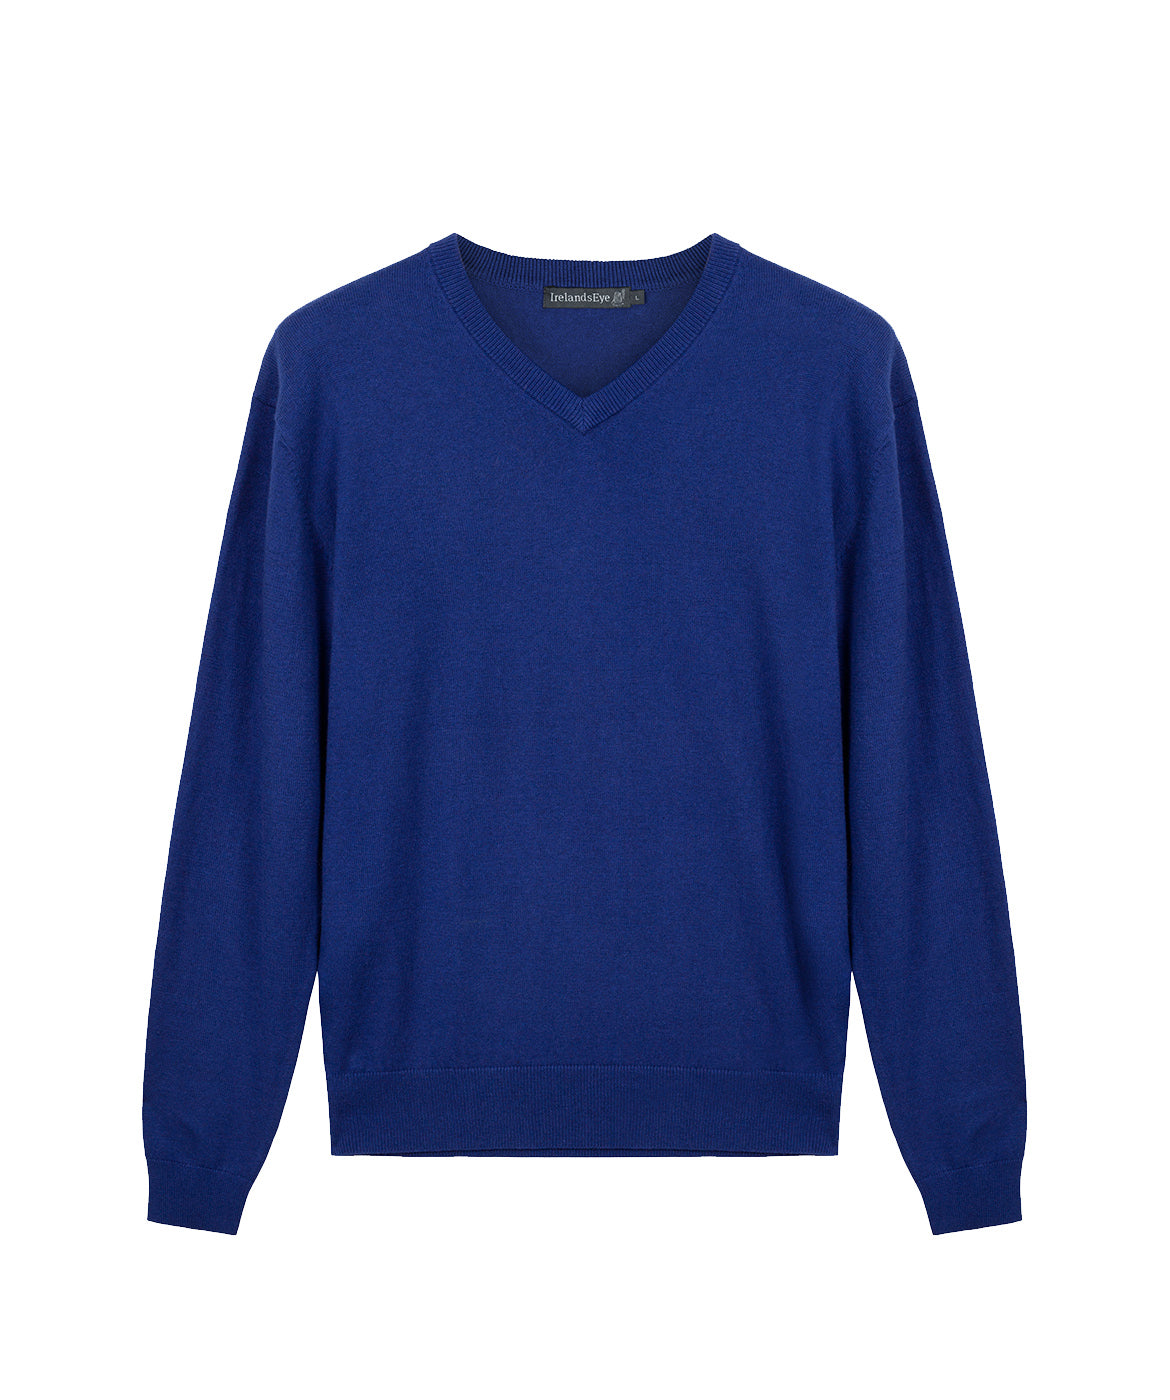 Mens knitted extra fine soft touch v neck sweater Ocean Blue